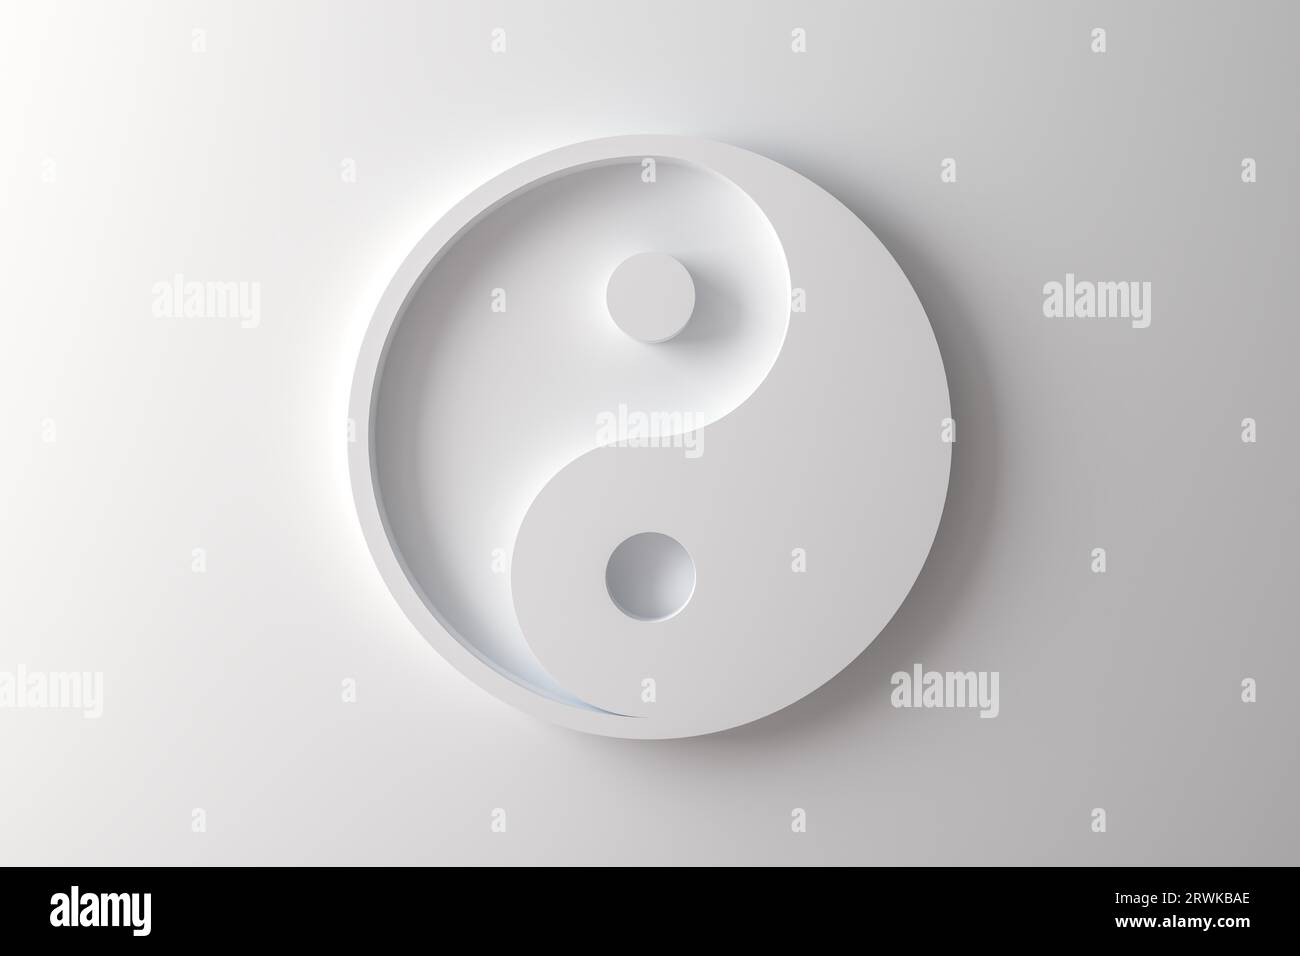 Chinese Yin Yang symbol on a white background, Taoism, dualism, religious symbol, 3D Render, 3D illustration Stock Photo